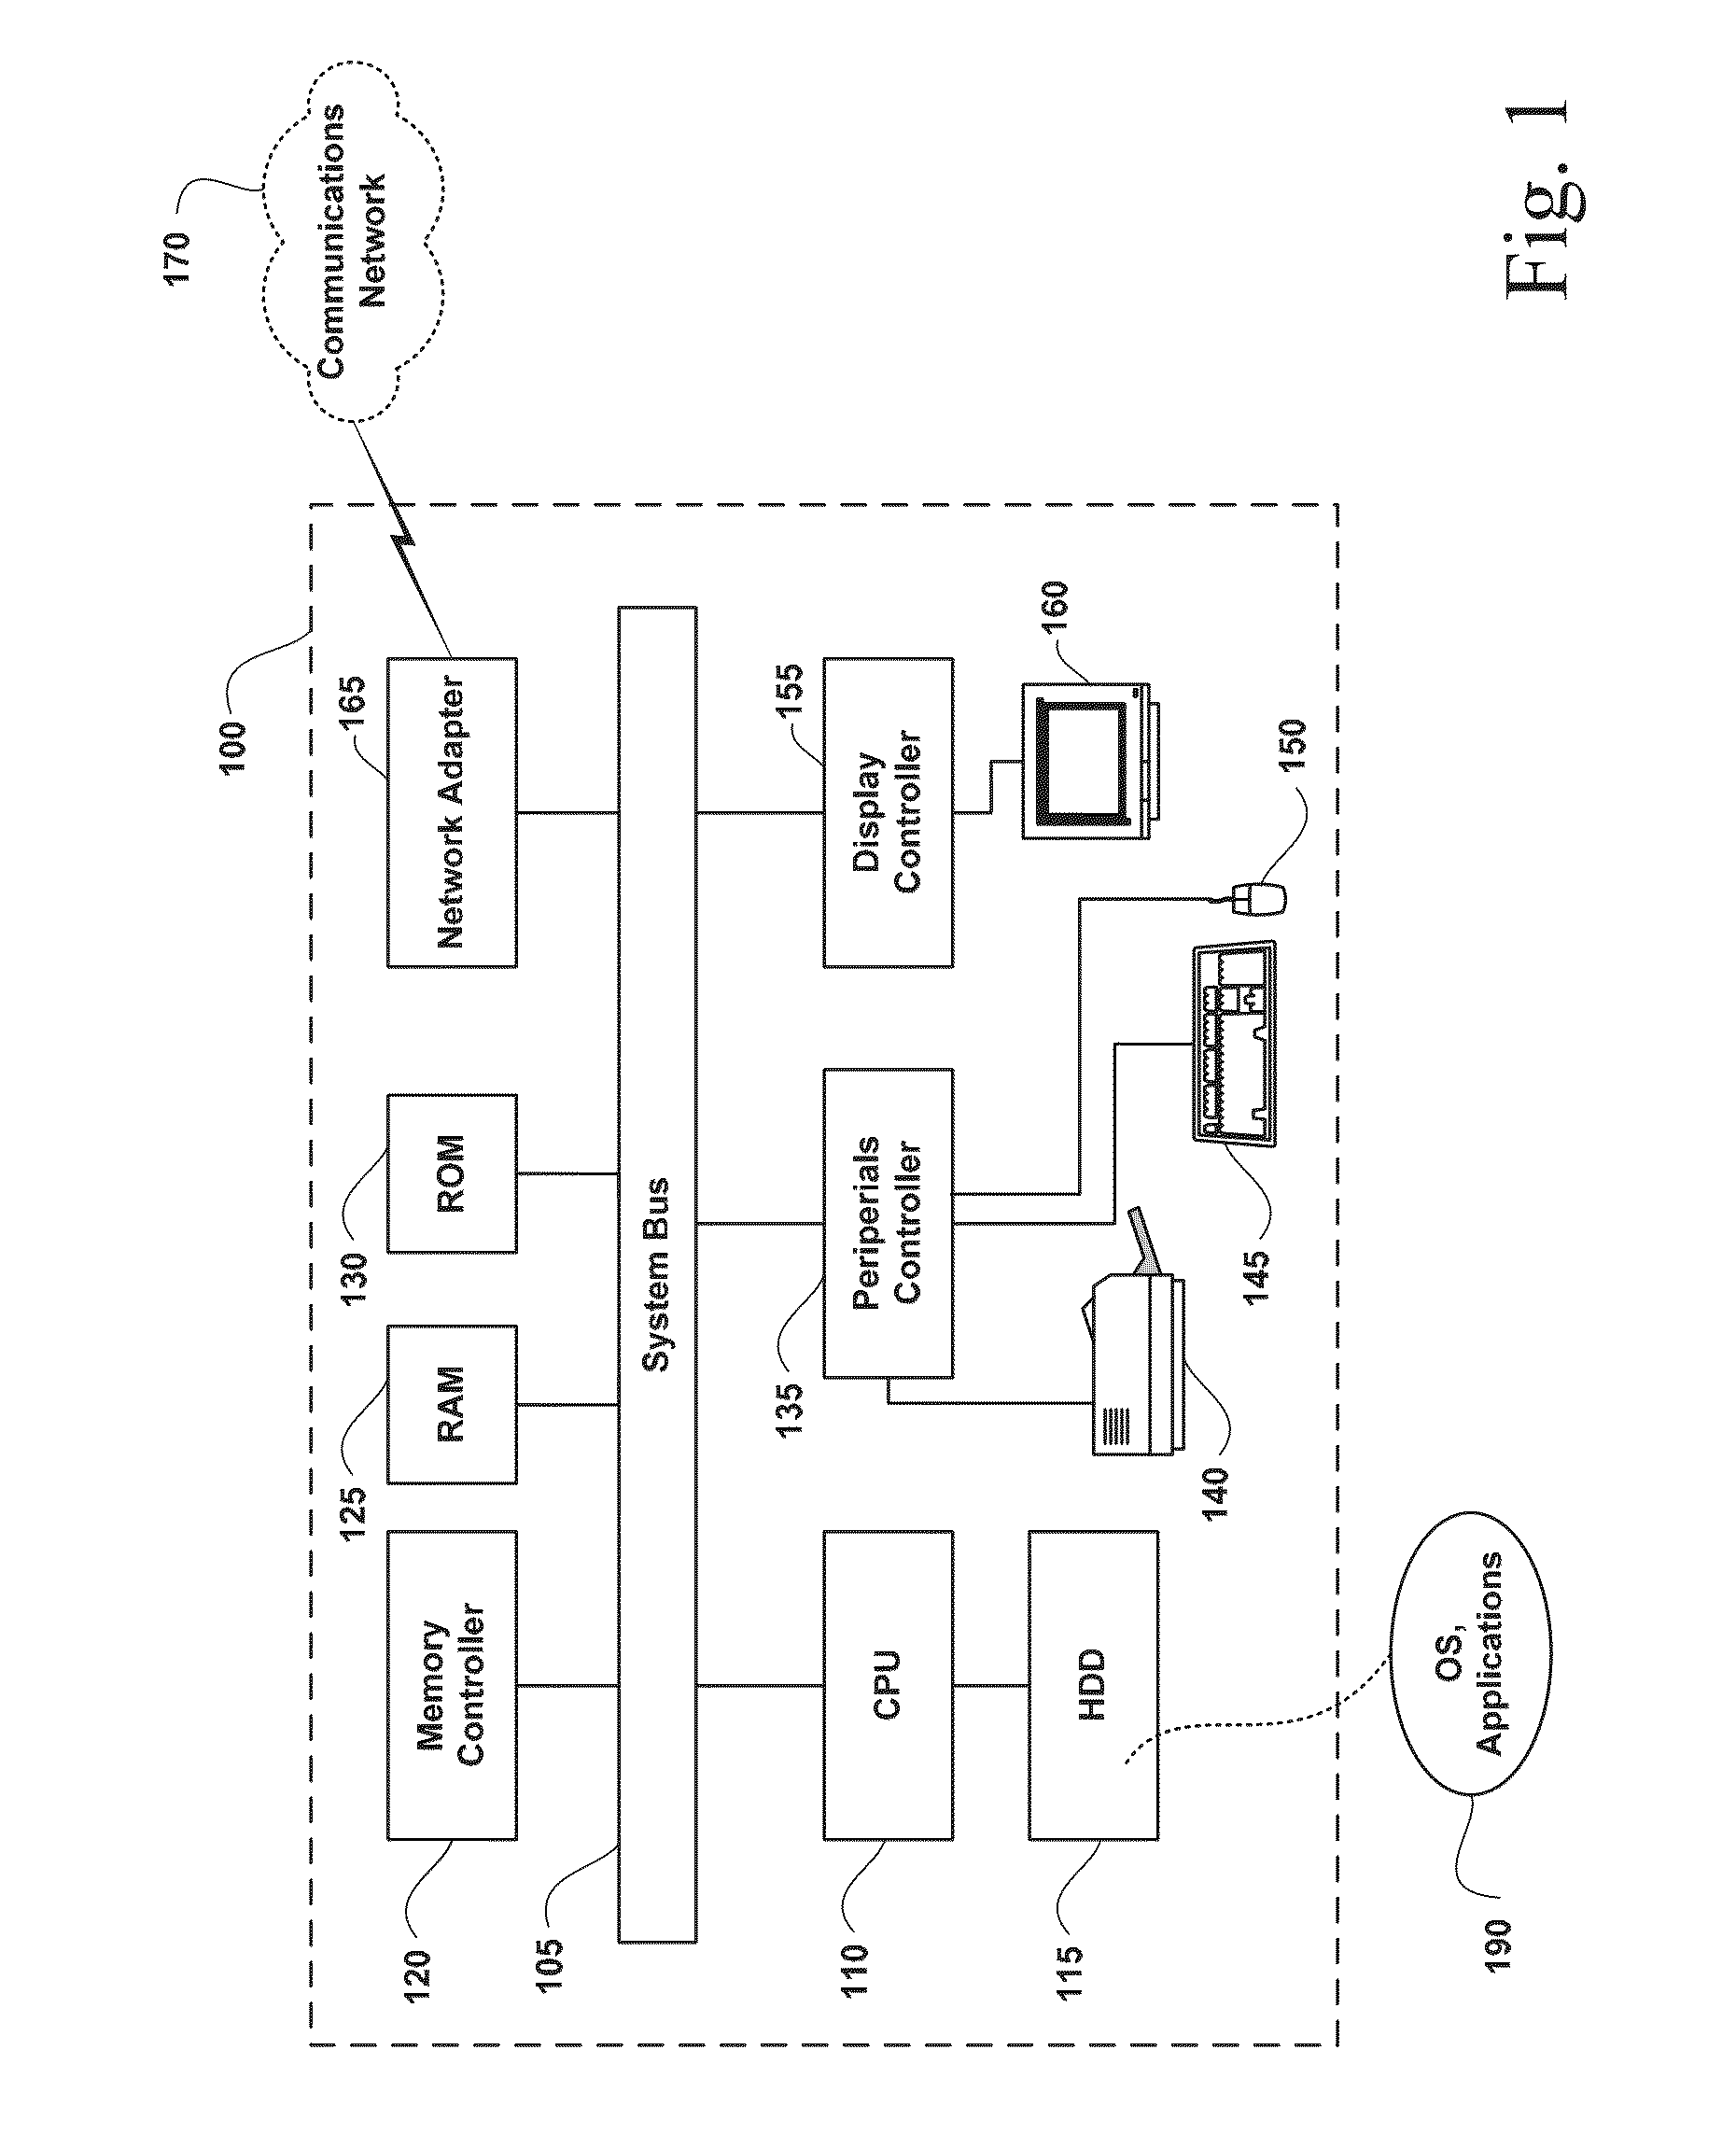 Apparatus, system, and method for obfuscation and de-obfuscation of digital content